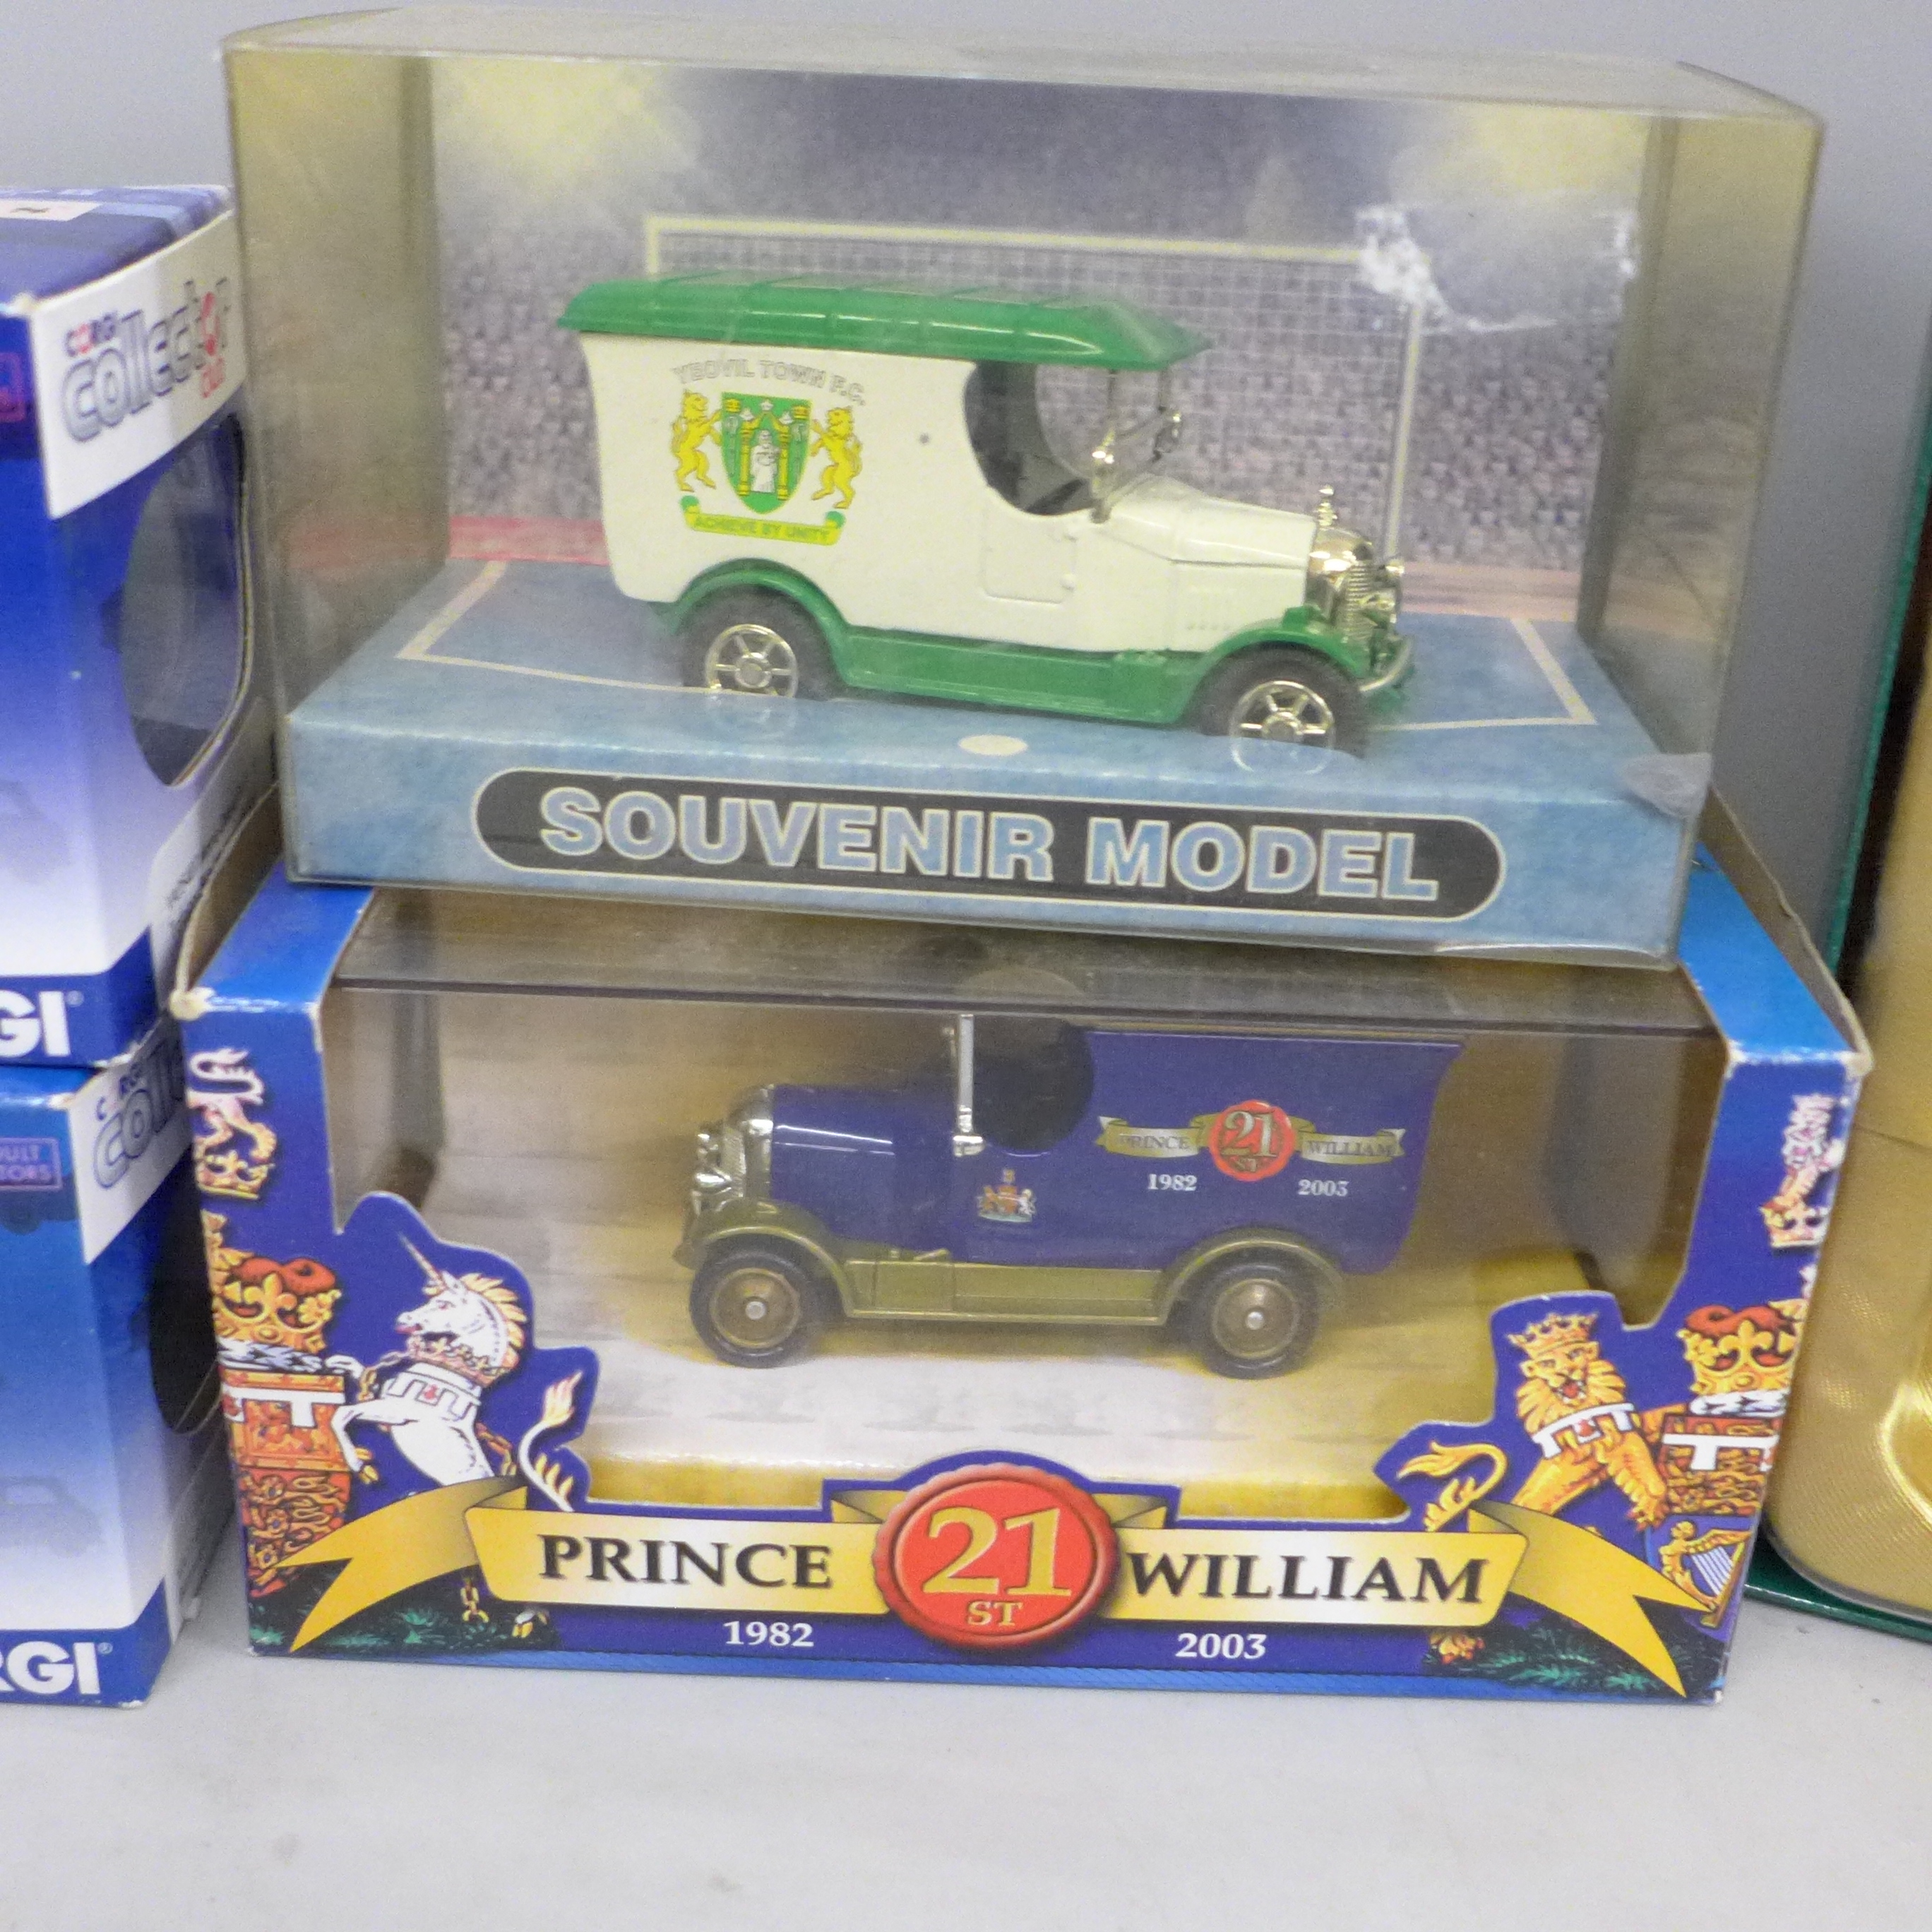 A collection of nine die-cast model vehicles; Days Gone HRH The Prince of Wales 60th Birthday Set, - Image 2 of 3